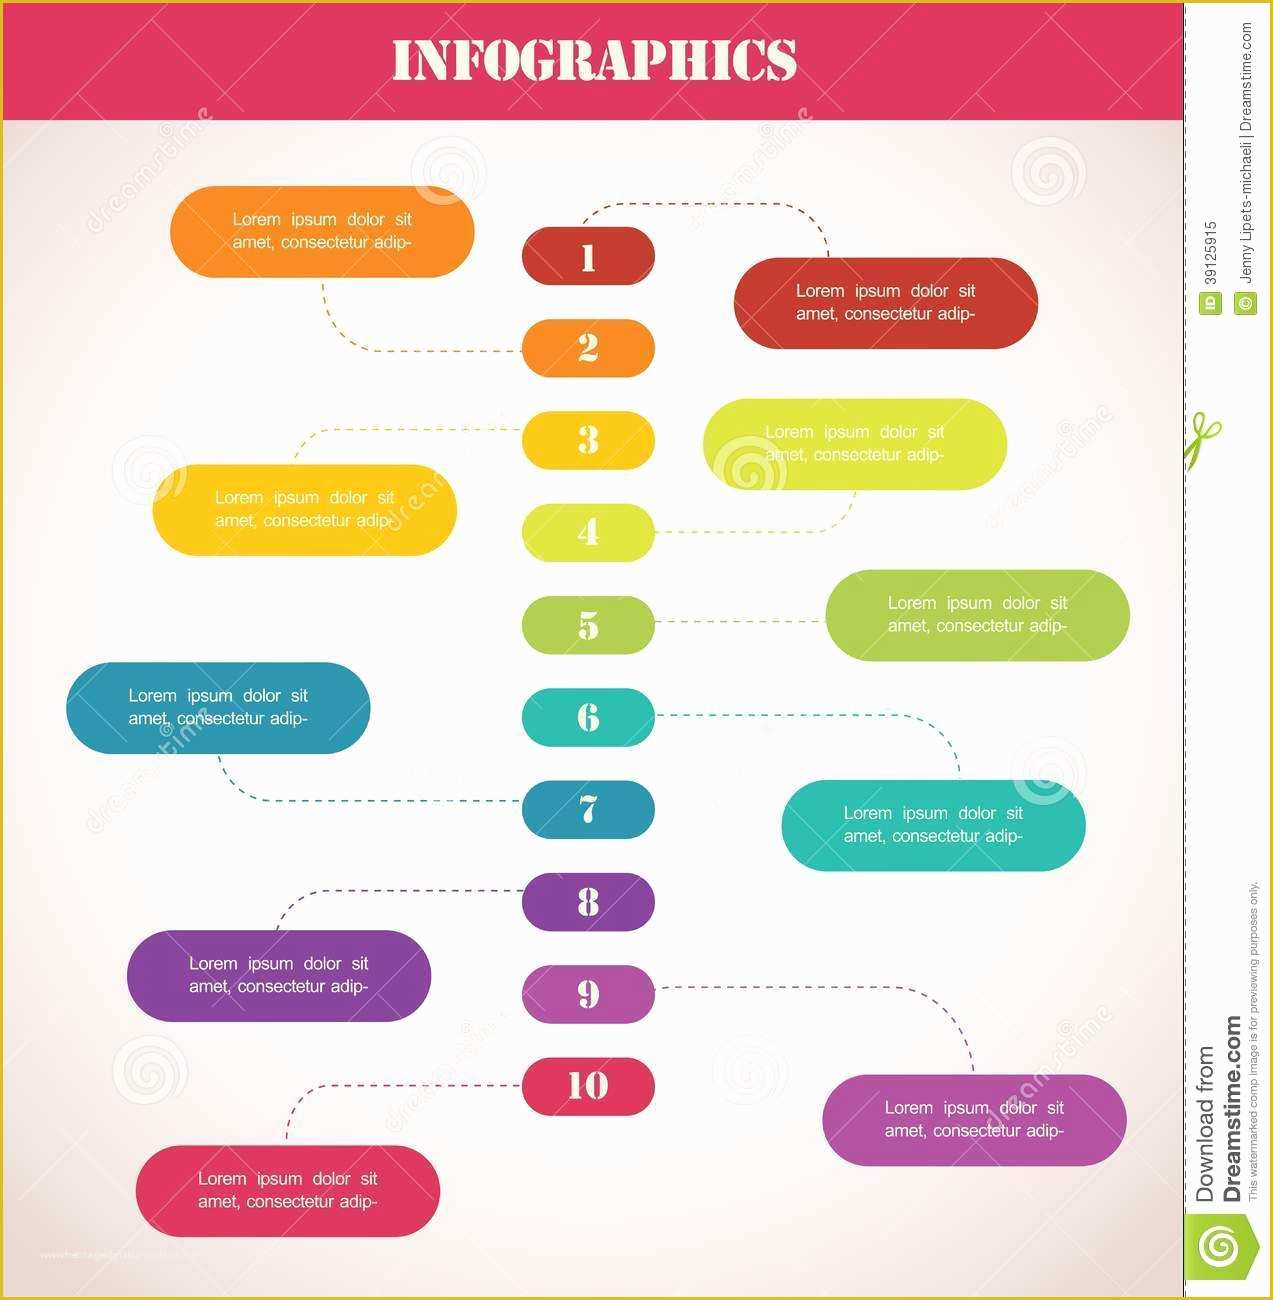 Free Infographic Templates for Word Of 14 Infographic Templates for Word Resume